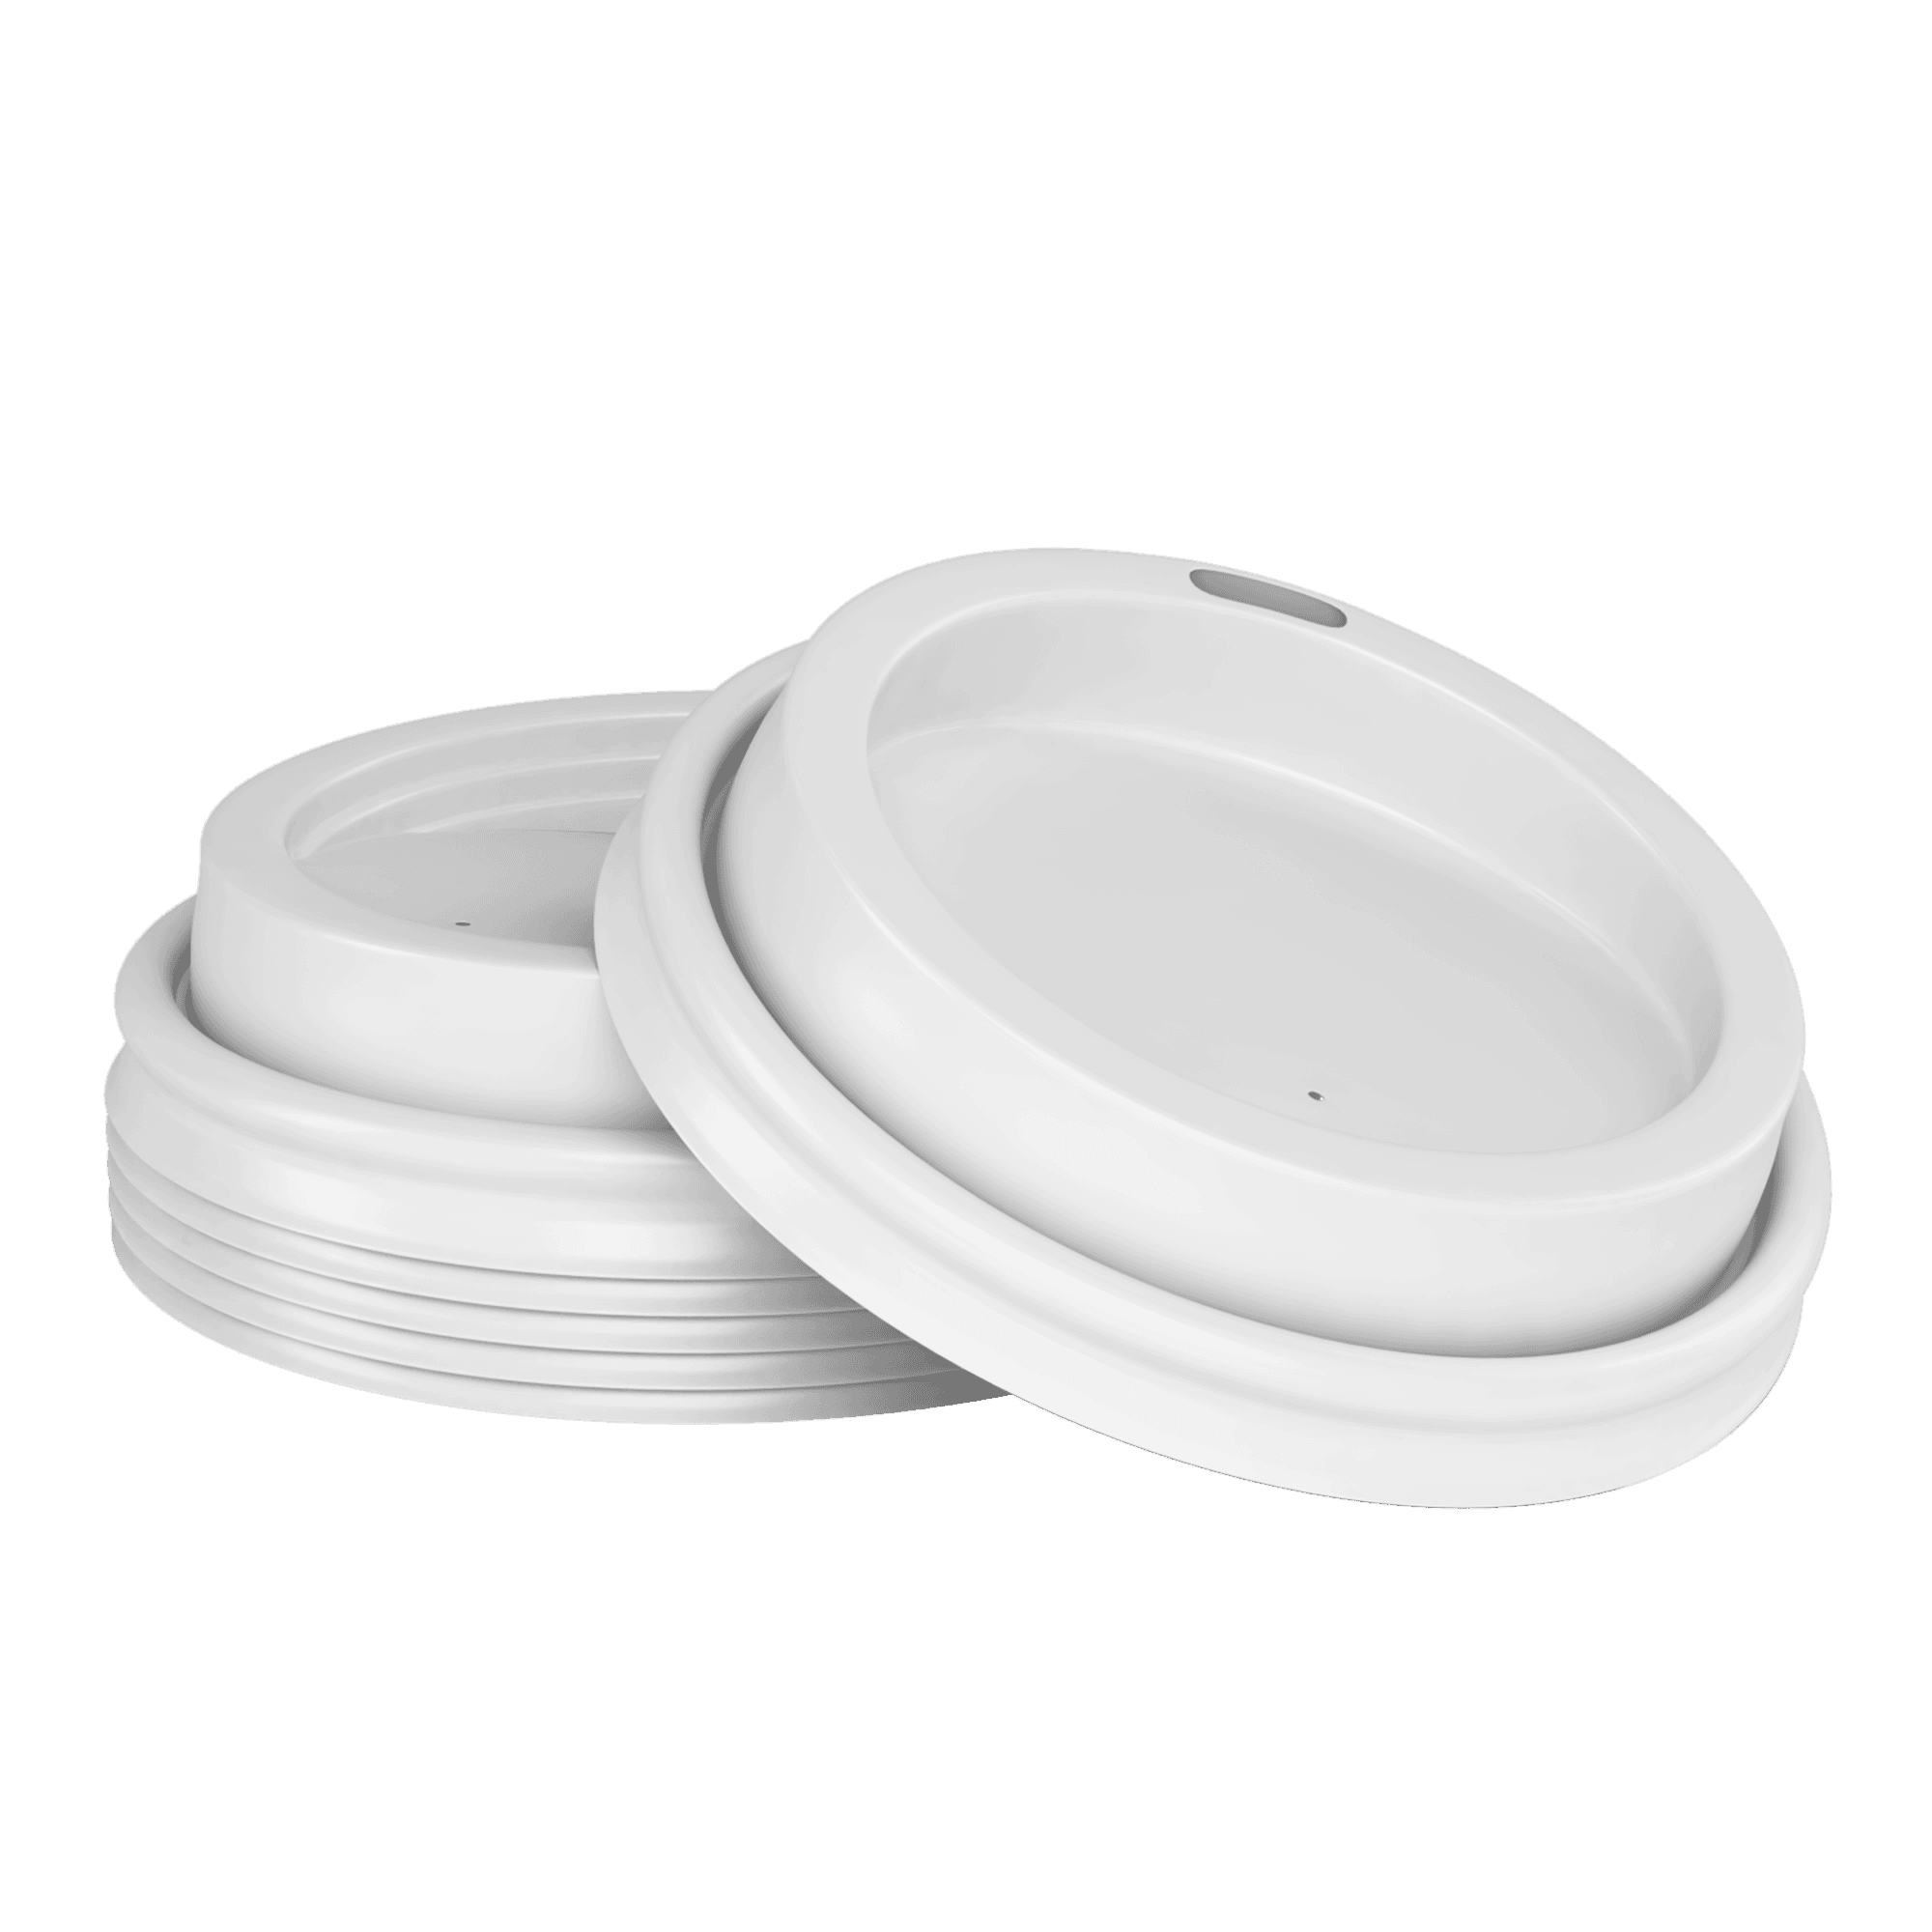 Product 80mm (8oz) Hot Lids, White - MyPaperCups - Buy Now image